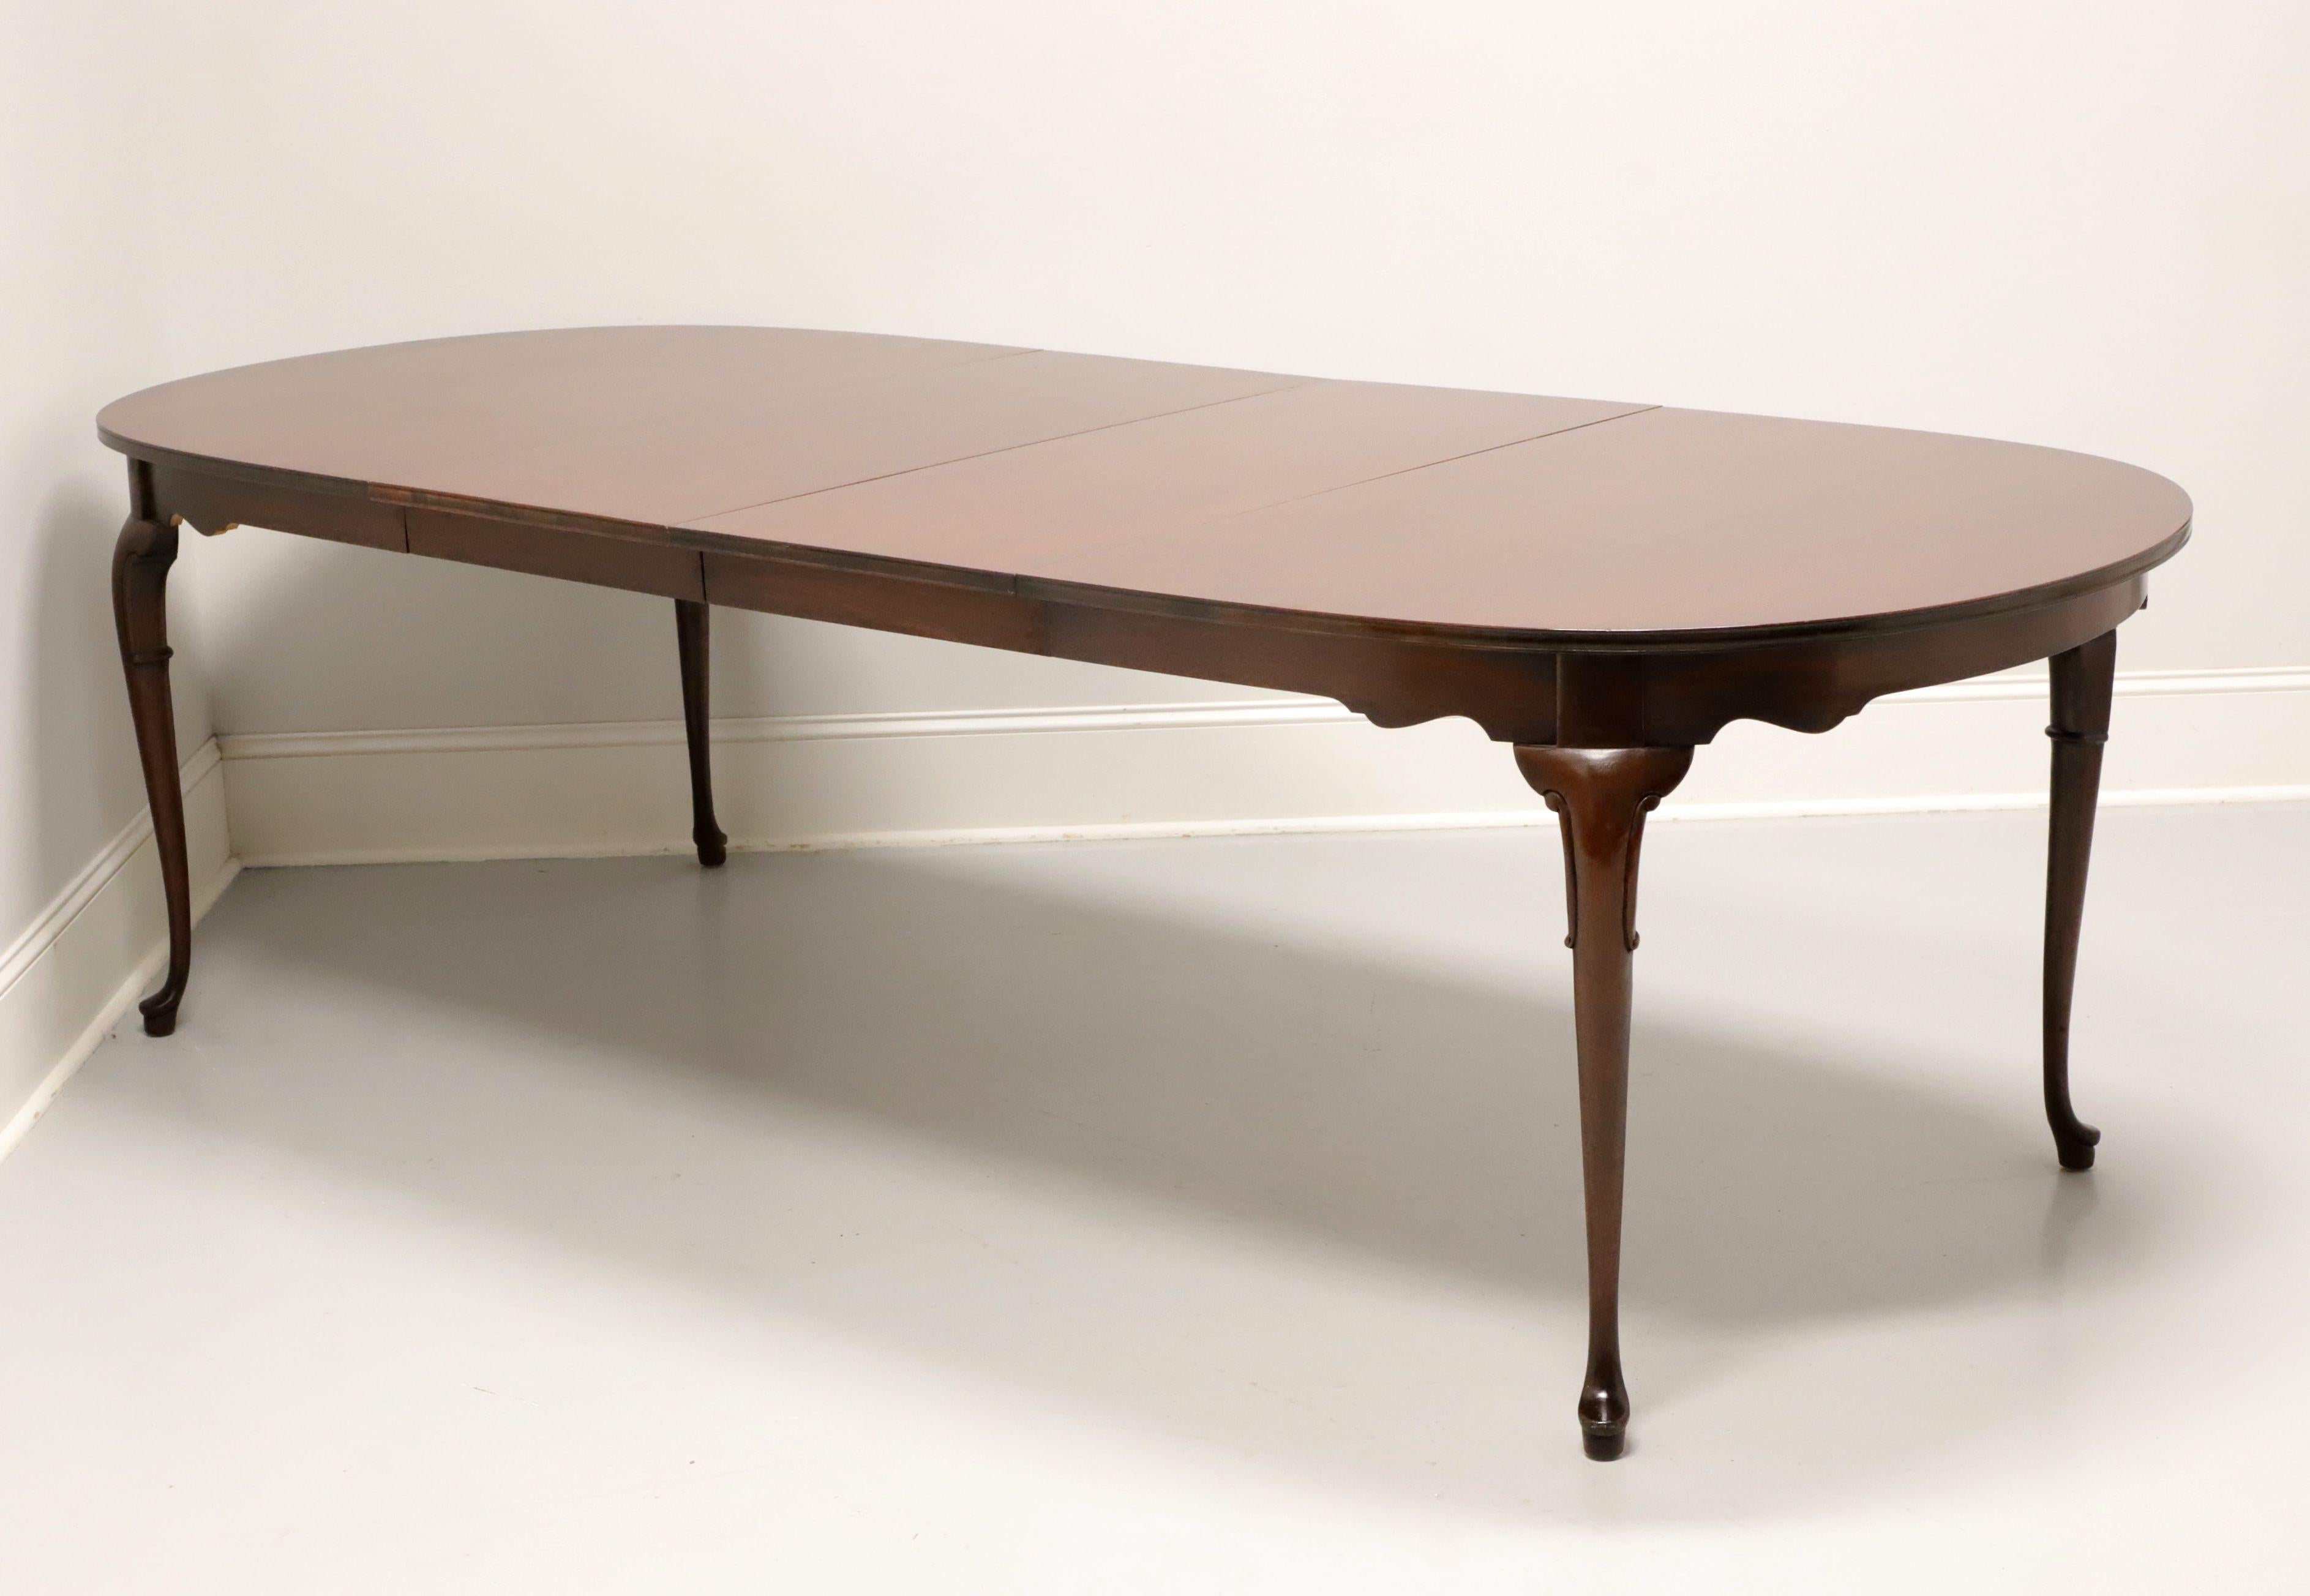 20th Century HICKORY CHAIR Mahogany Queen Anne Oval Dining Table For Sale